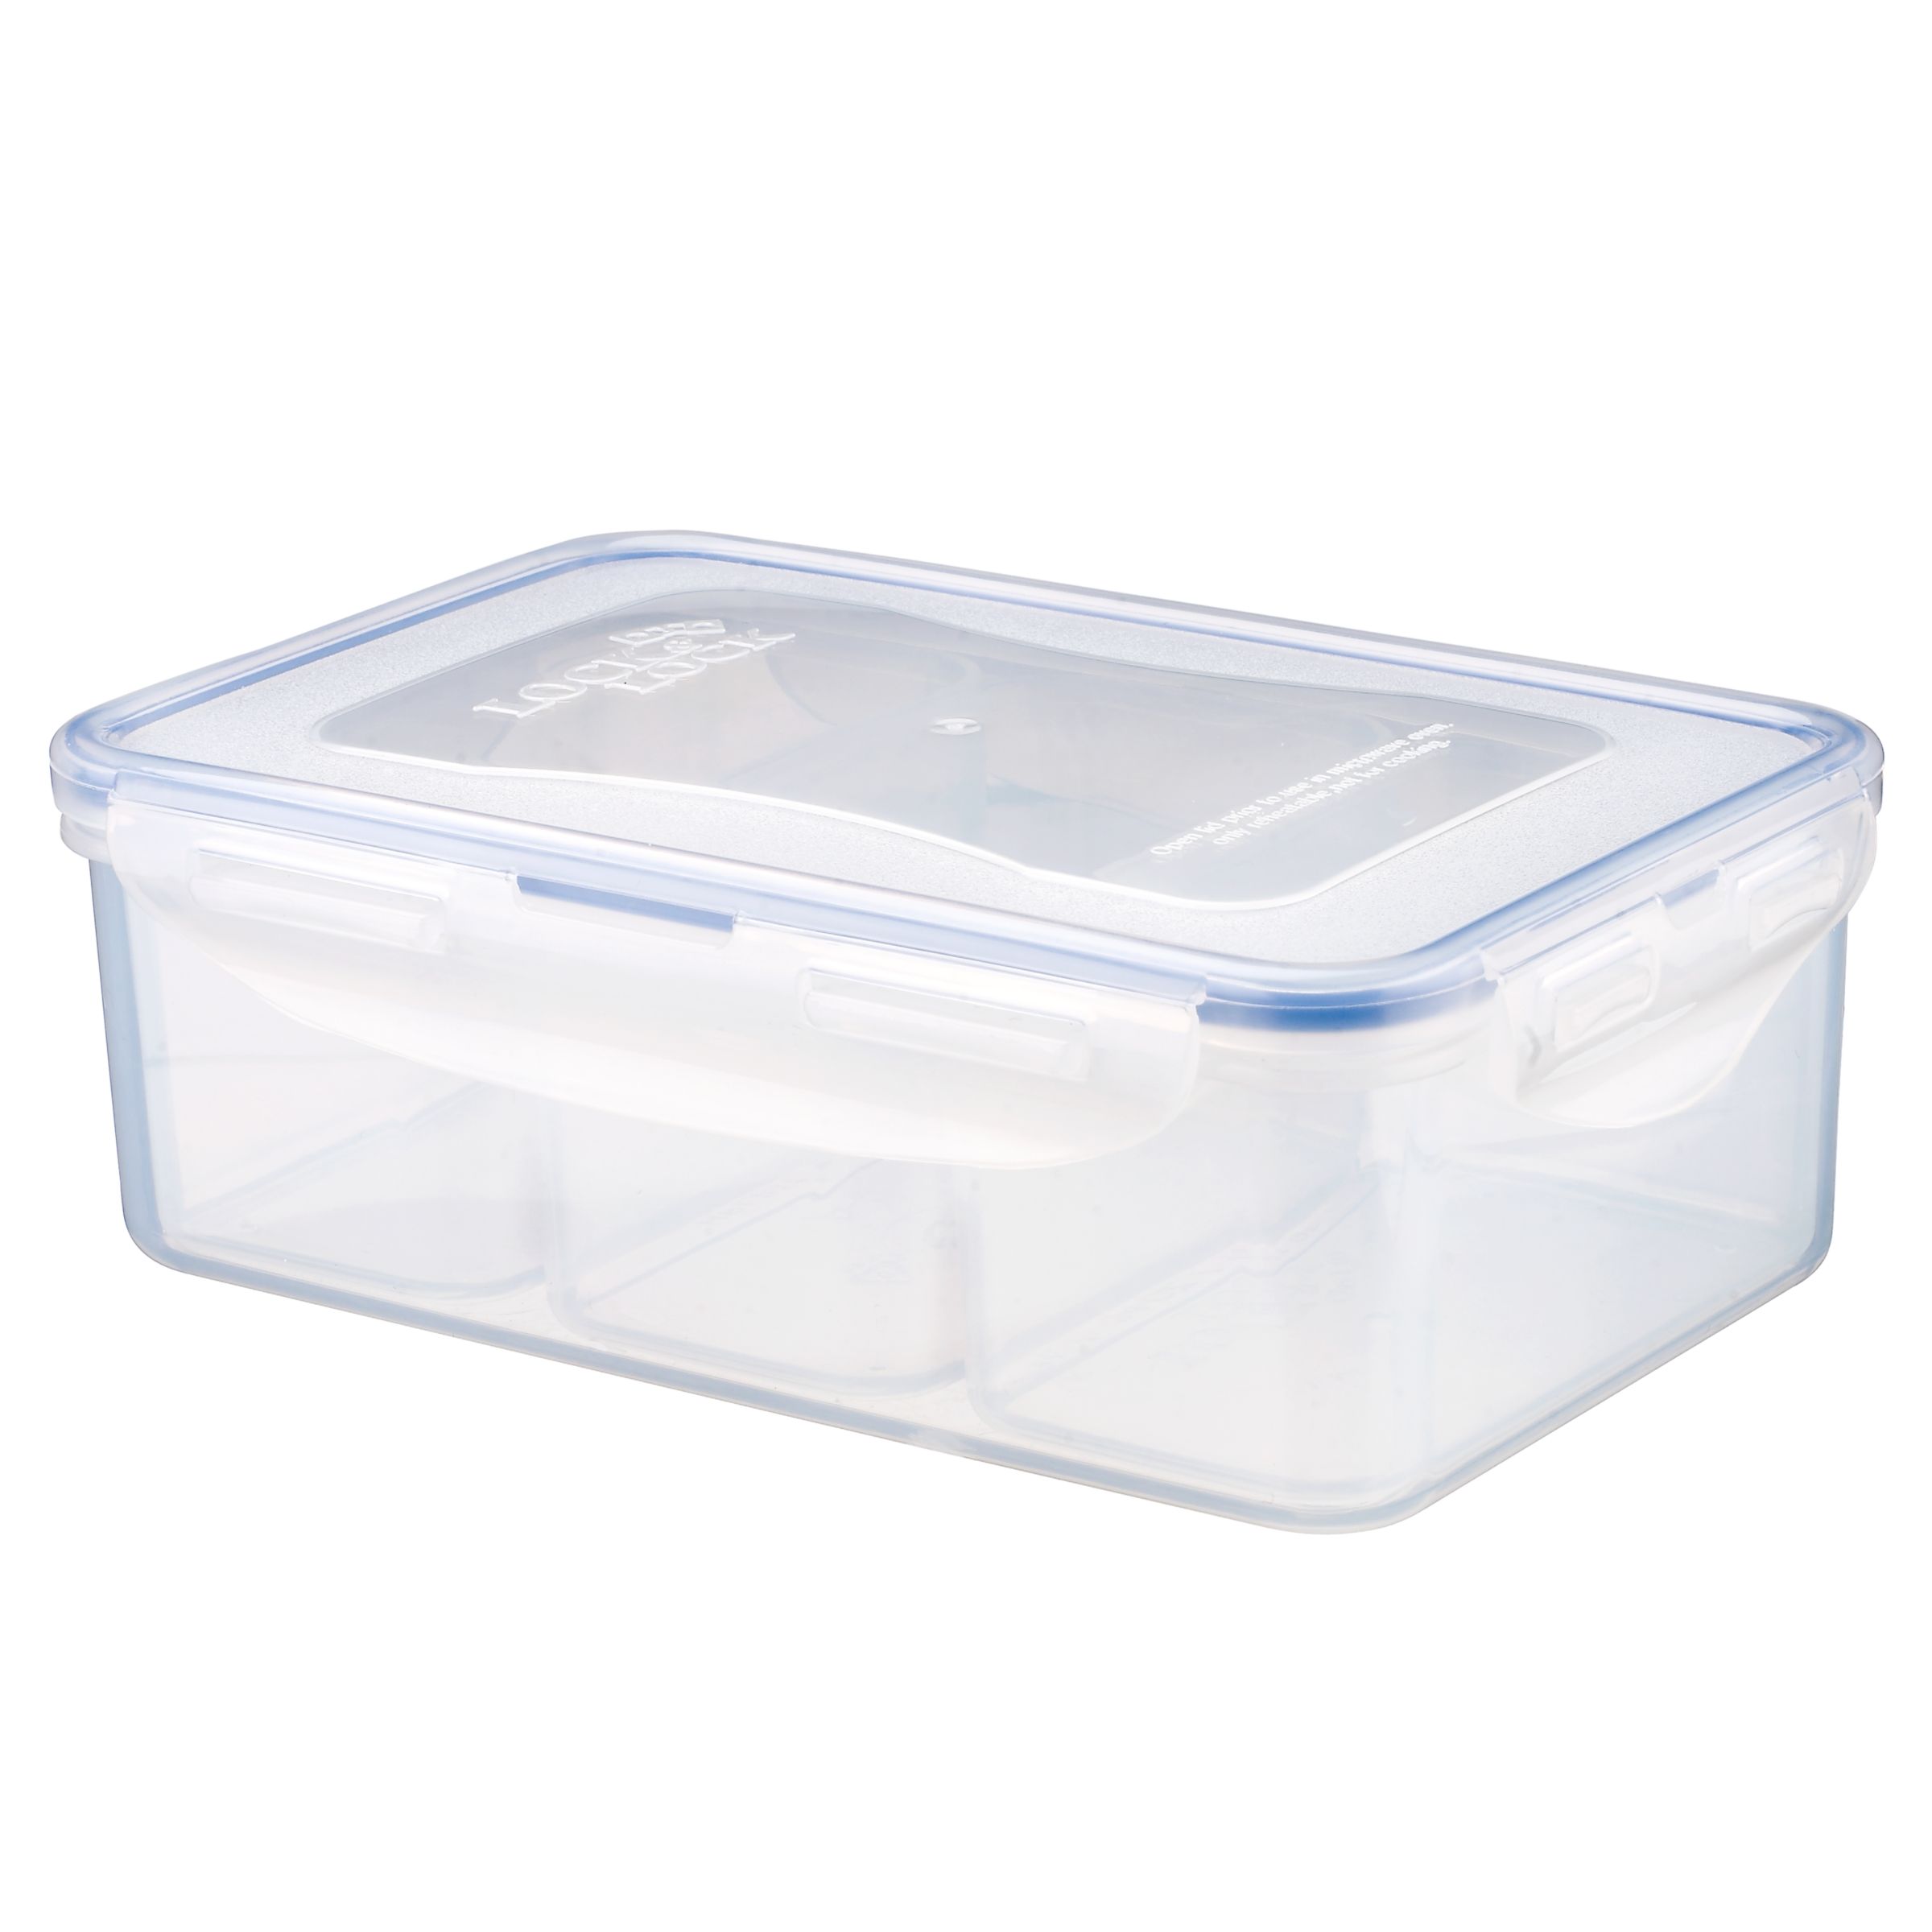 Lock and Lock 3 Compartment Storage Container,